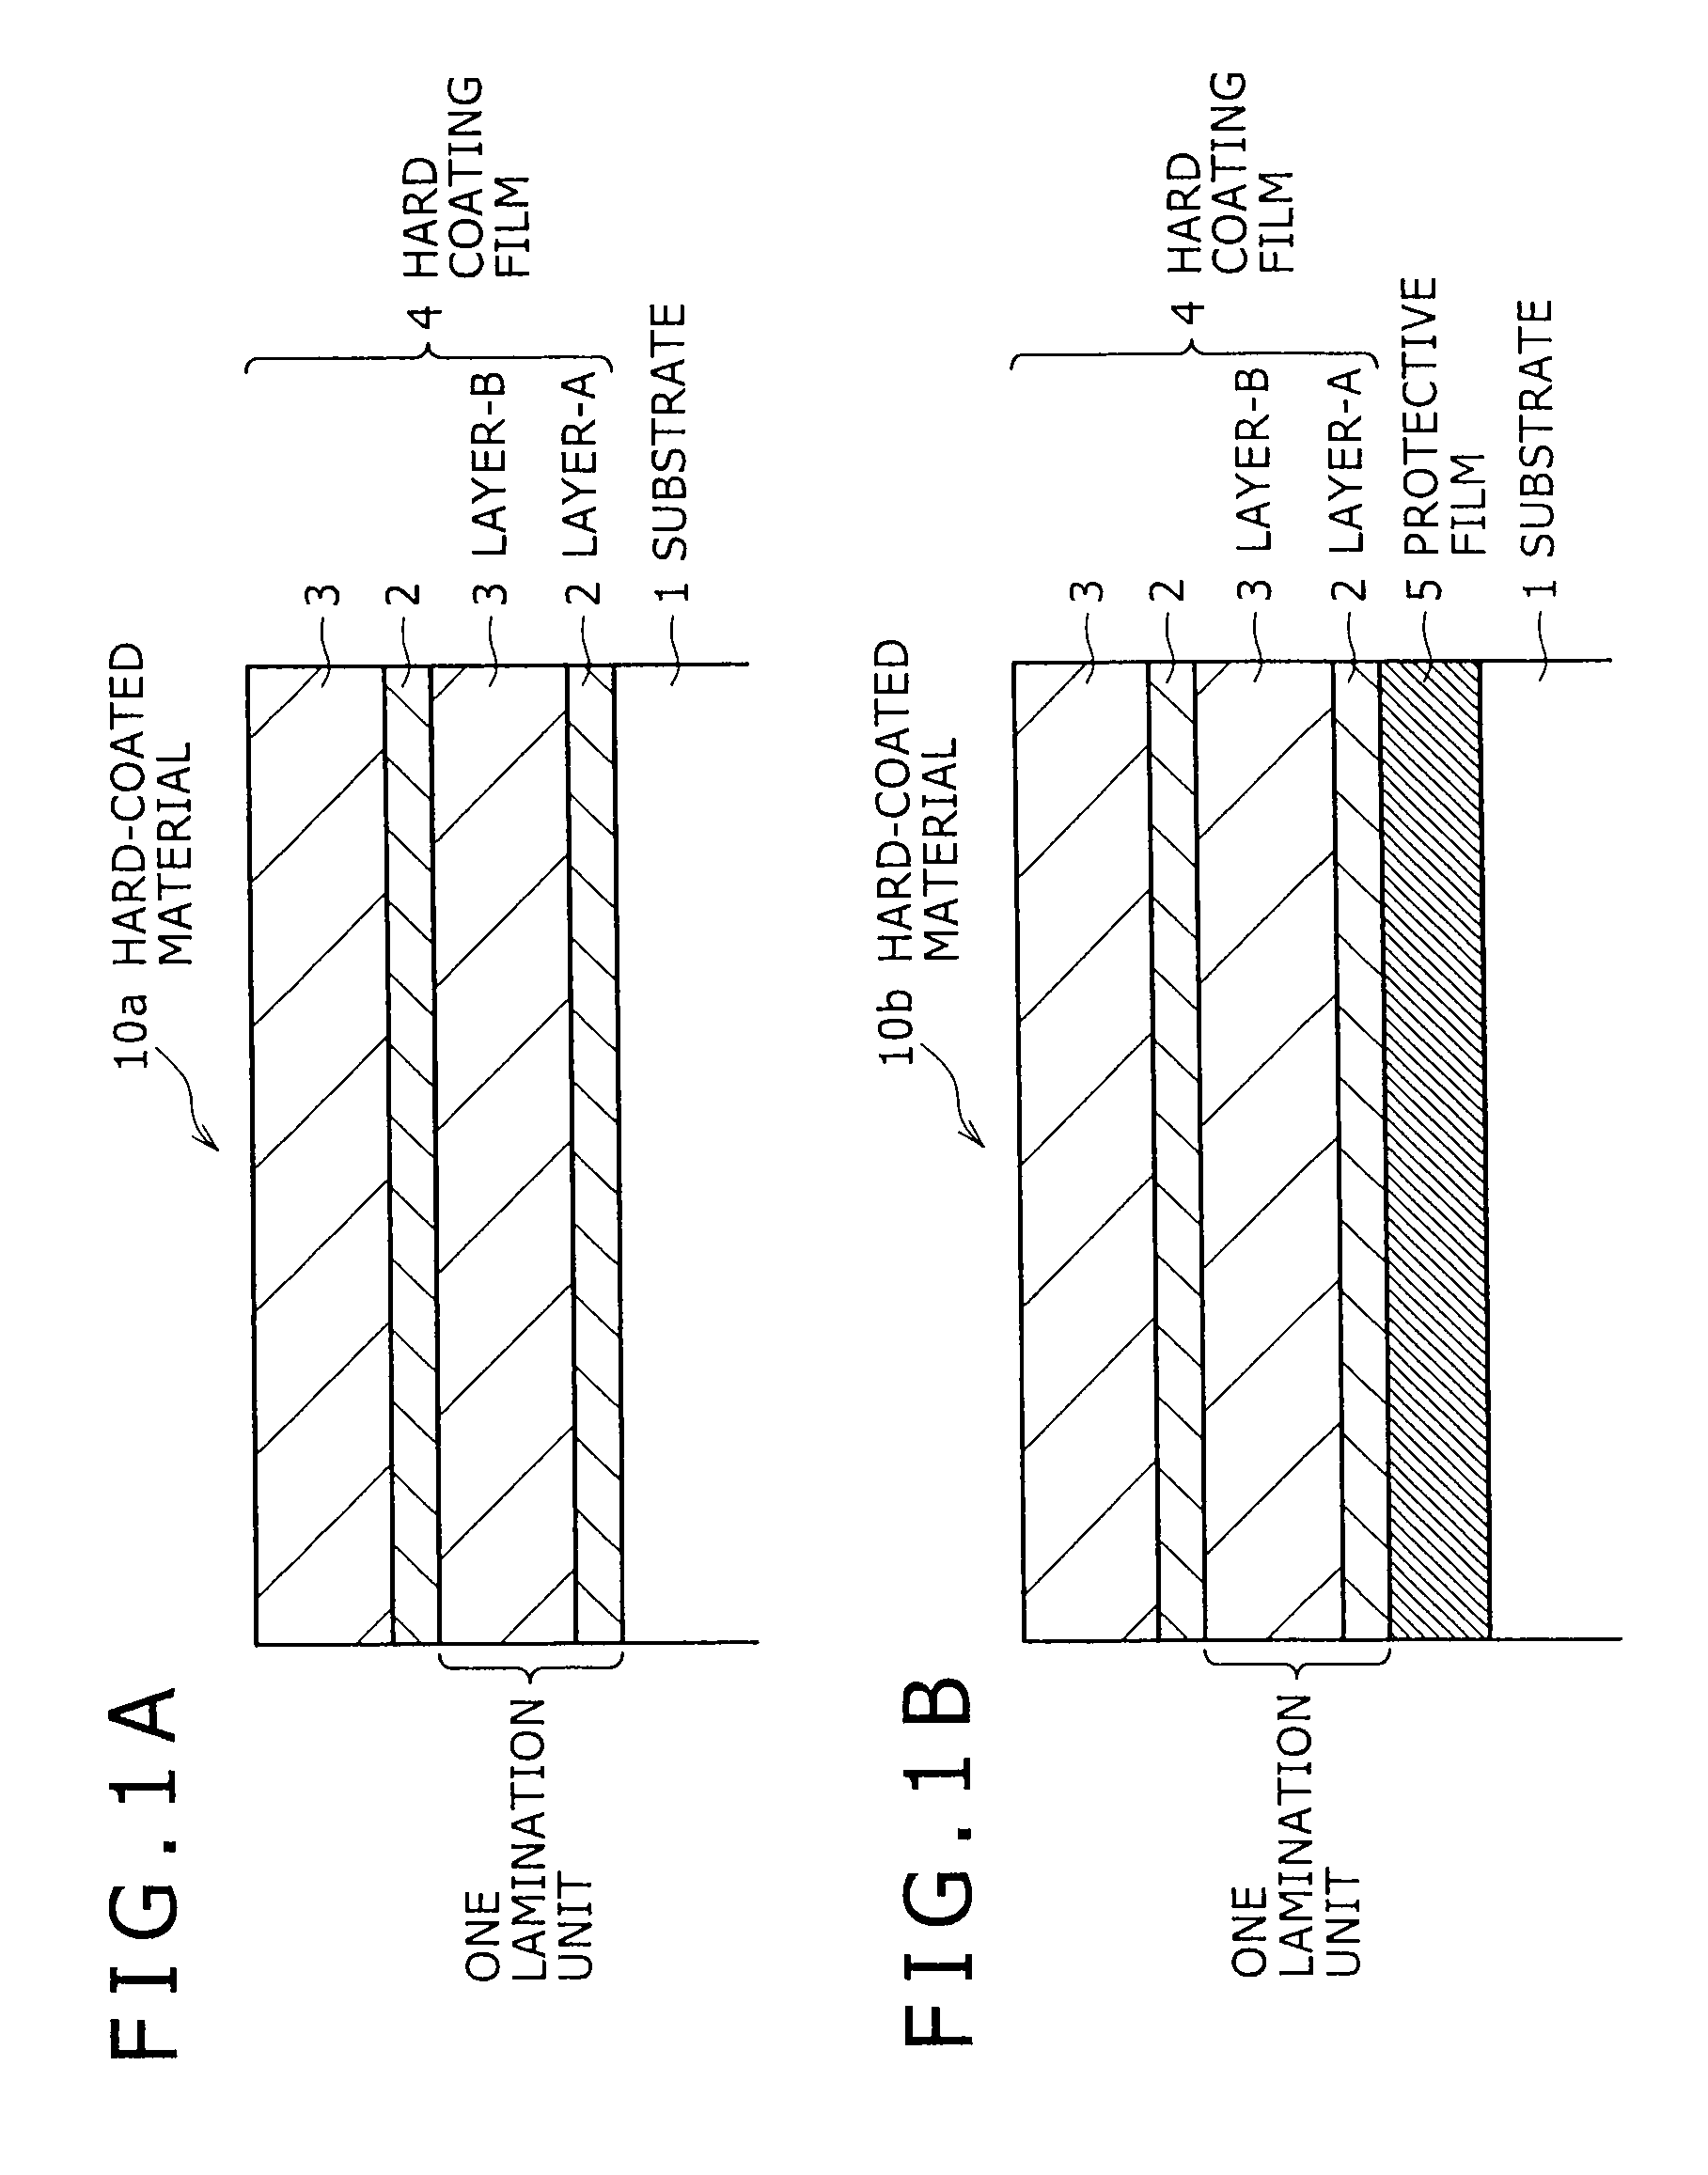 Material with hard coating film formed on substrate surface thereof